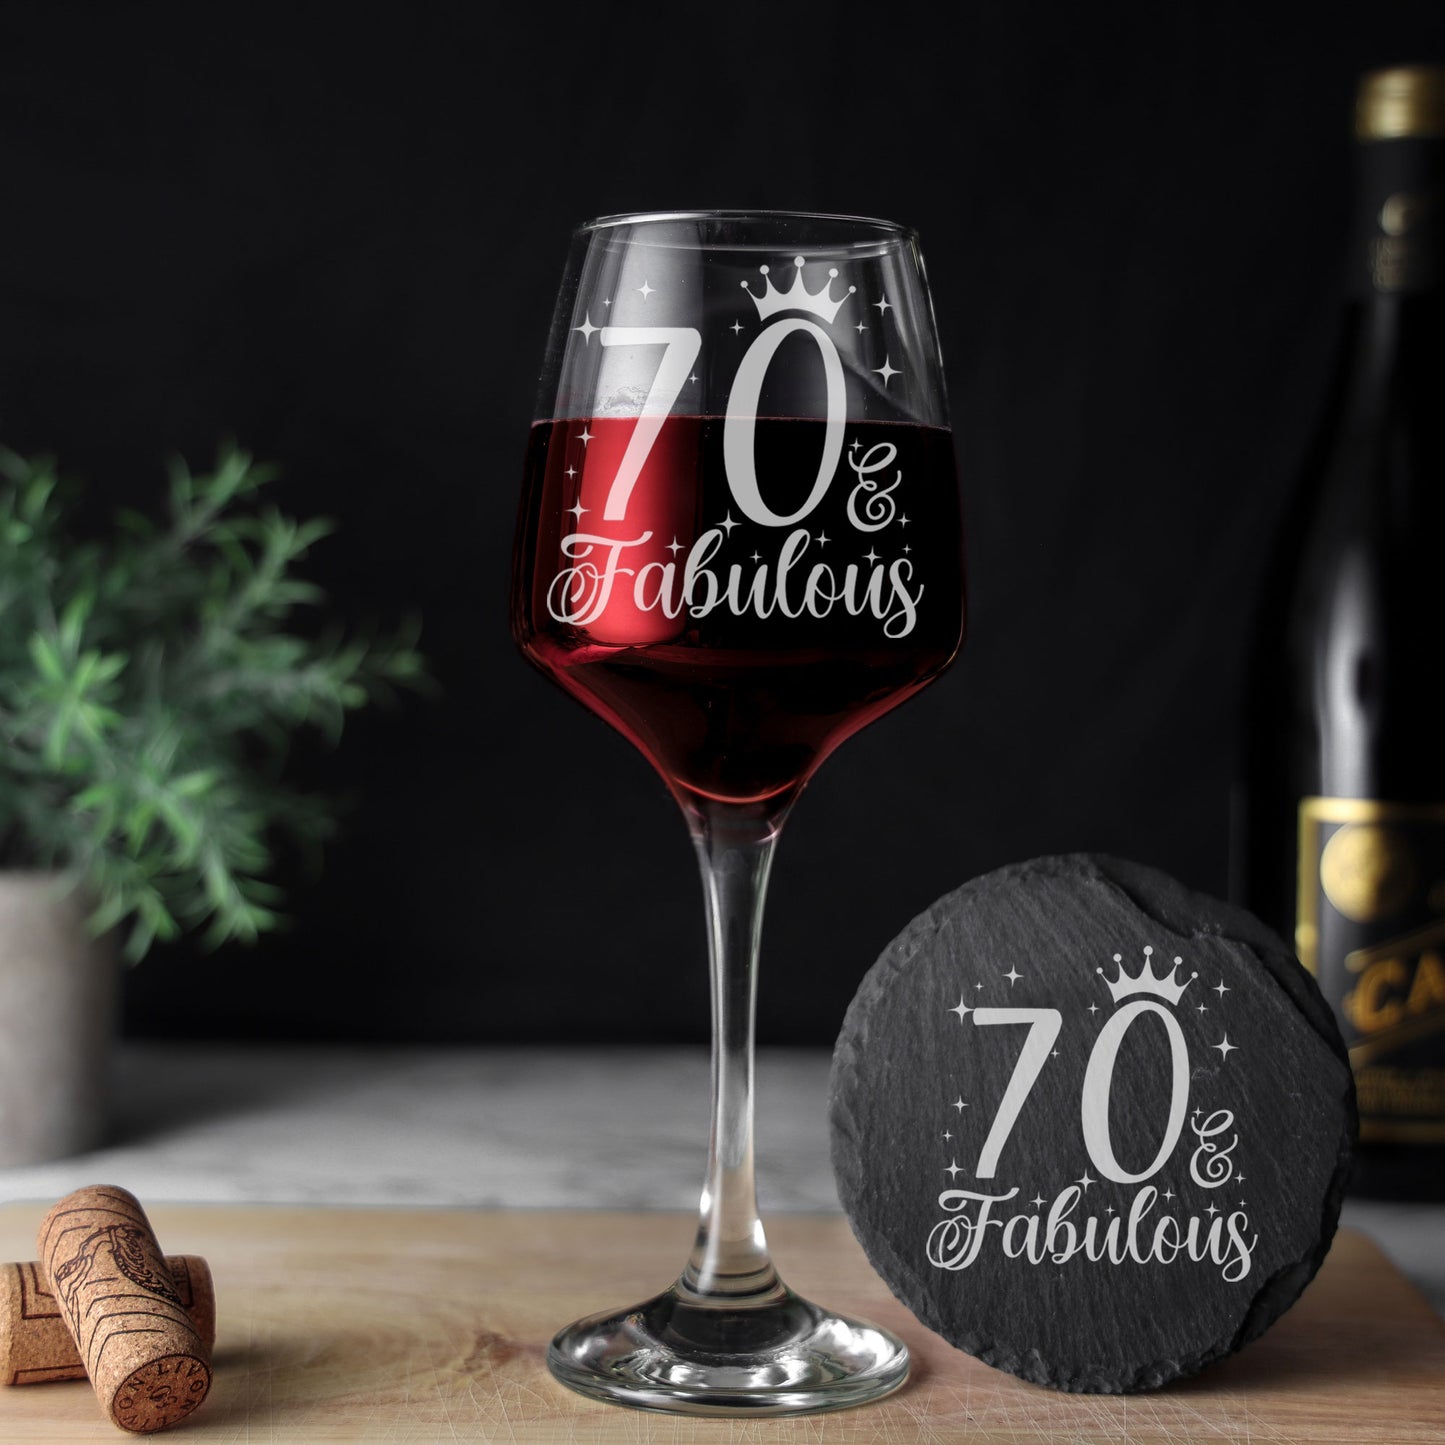 70 & Fabulous 70th Birthday Gift Engraved Wine Glass and/or Coaster Set  - Always Looking Good - Glass & Round Coaster  